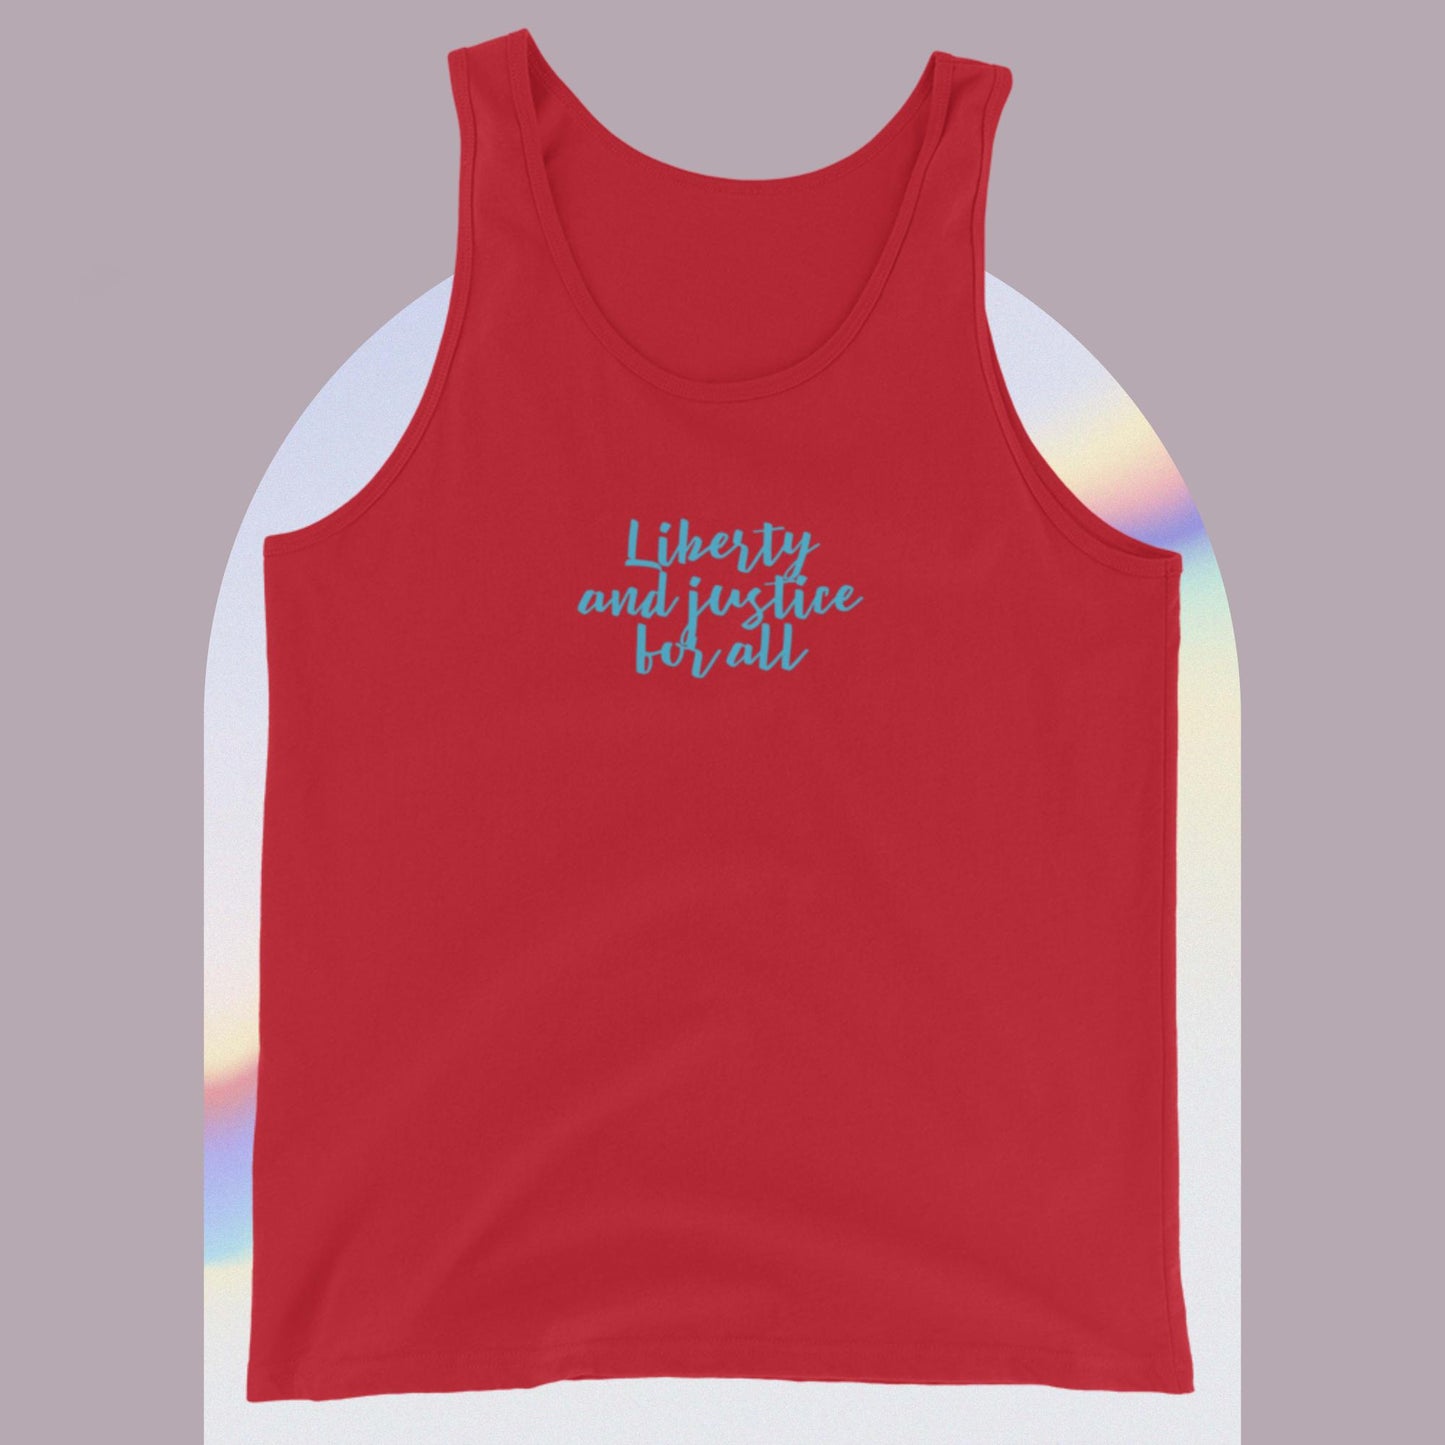 Liberty and justice for all, Unisex Tank Top